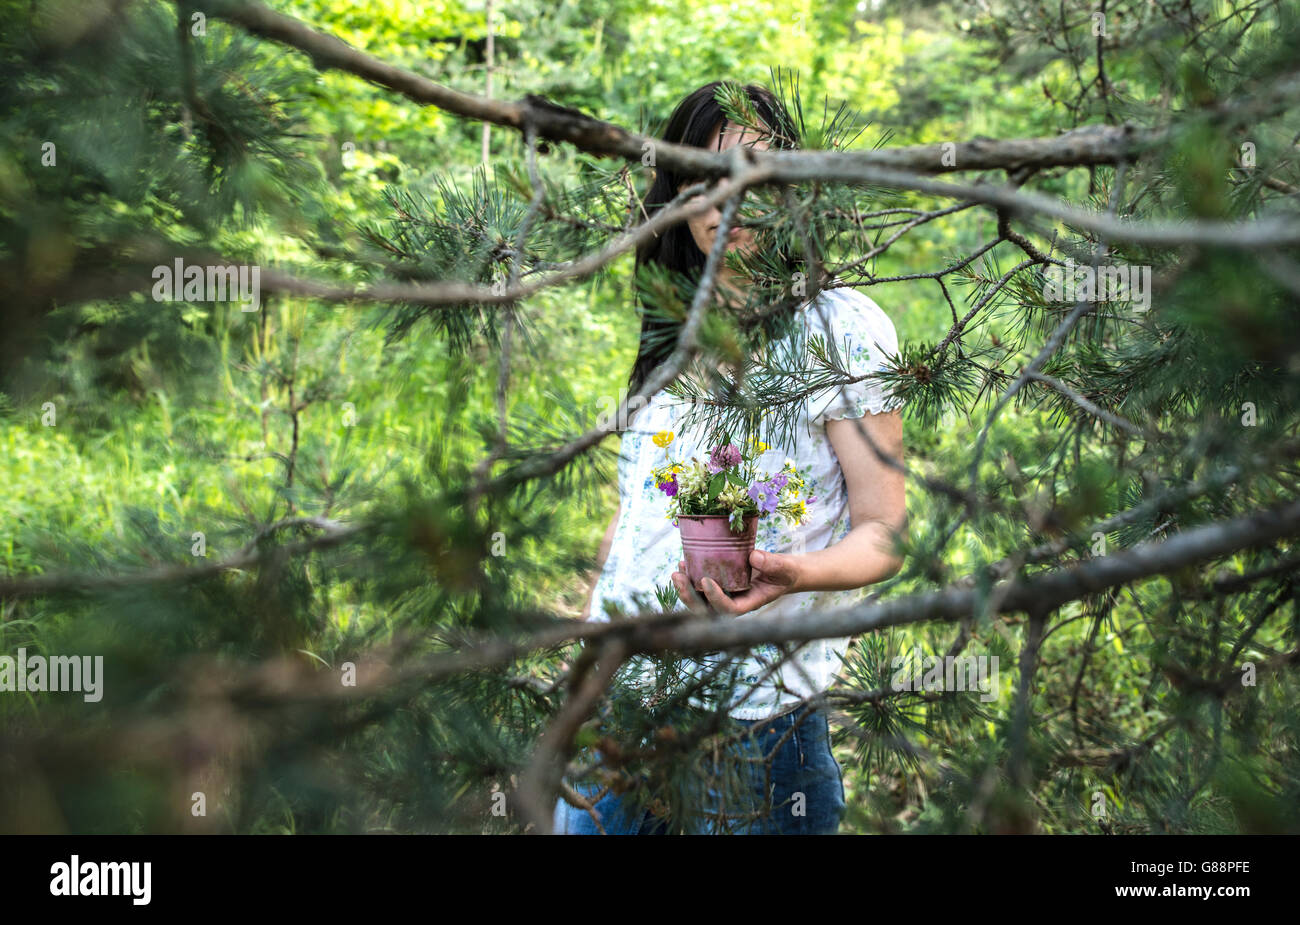 Woman holding a flower pot with wildflowers in forest Stock Photo